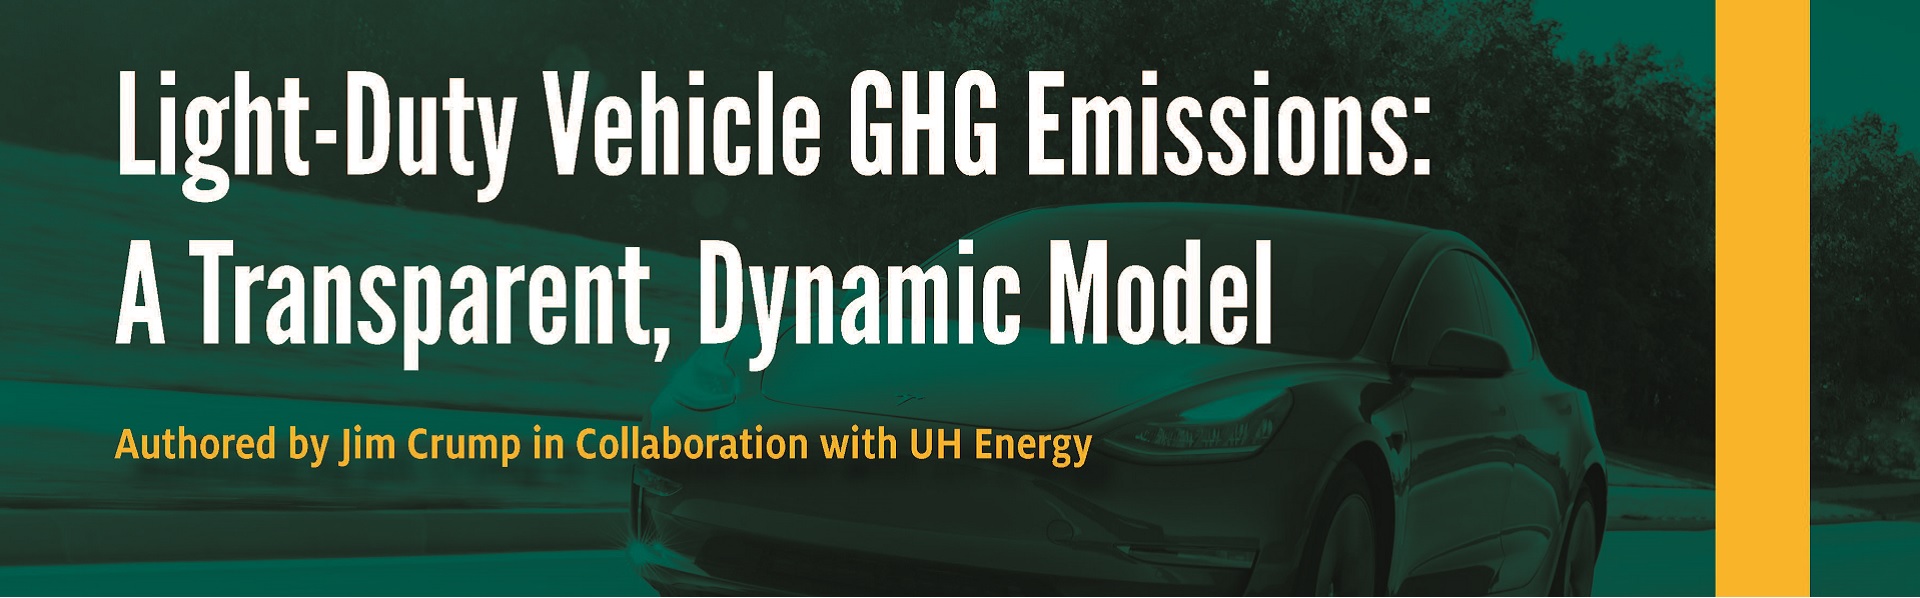 Light-Duty Vehicle GHG Emissions: A Transparent, Dynamic Model - Click here to read this White Paper